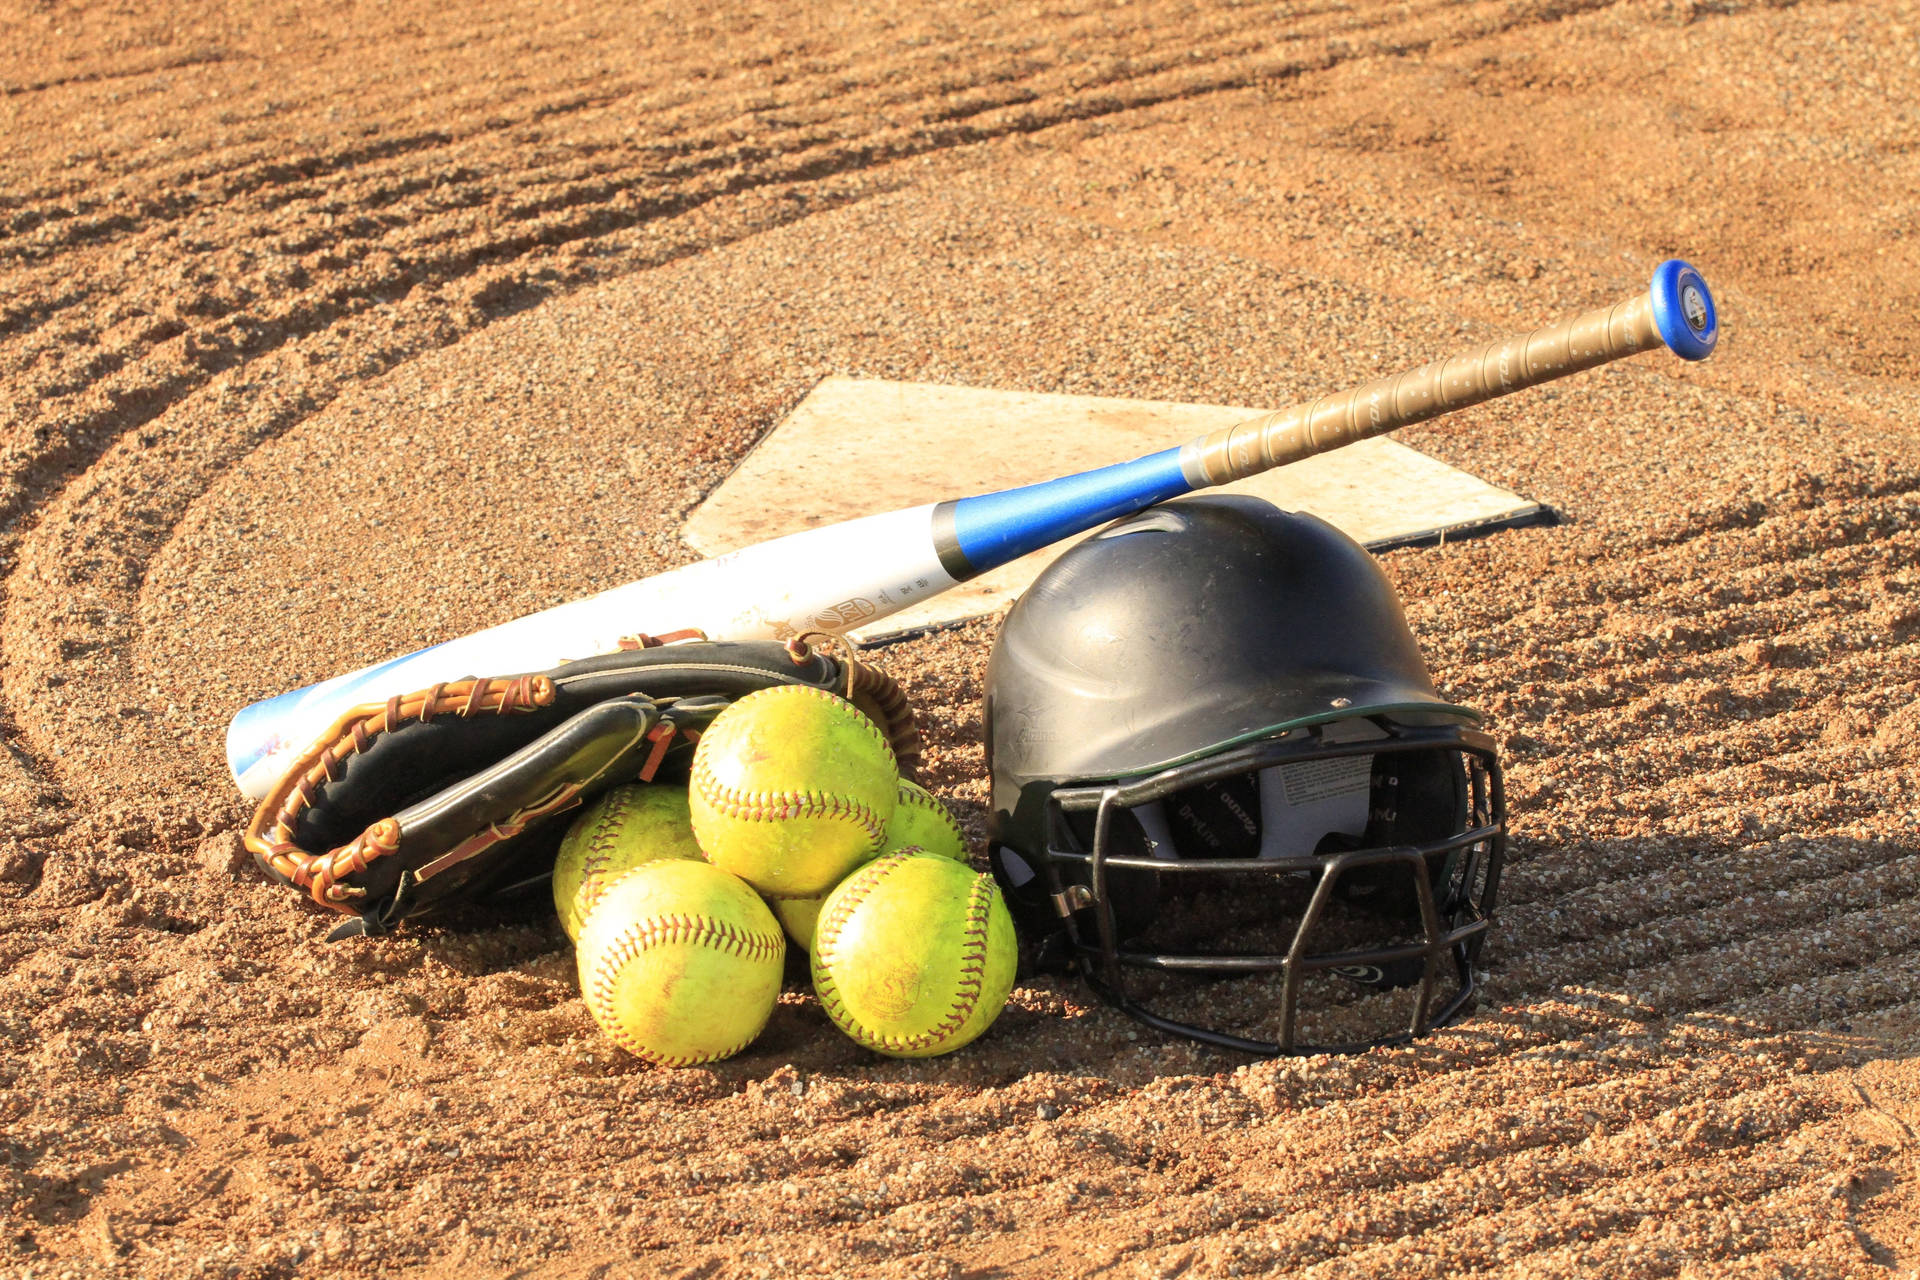 Softball 5184X3456 Wallpaper and Background Image